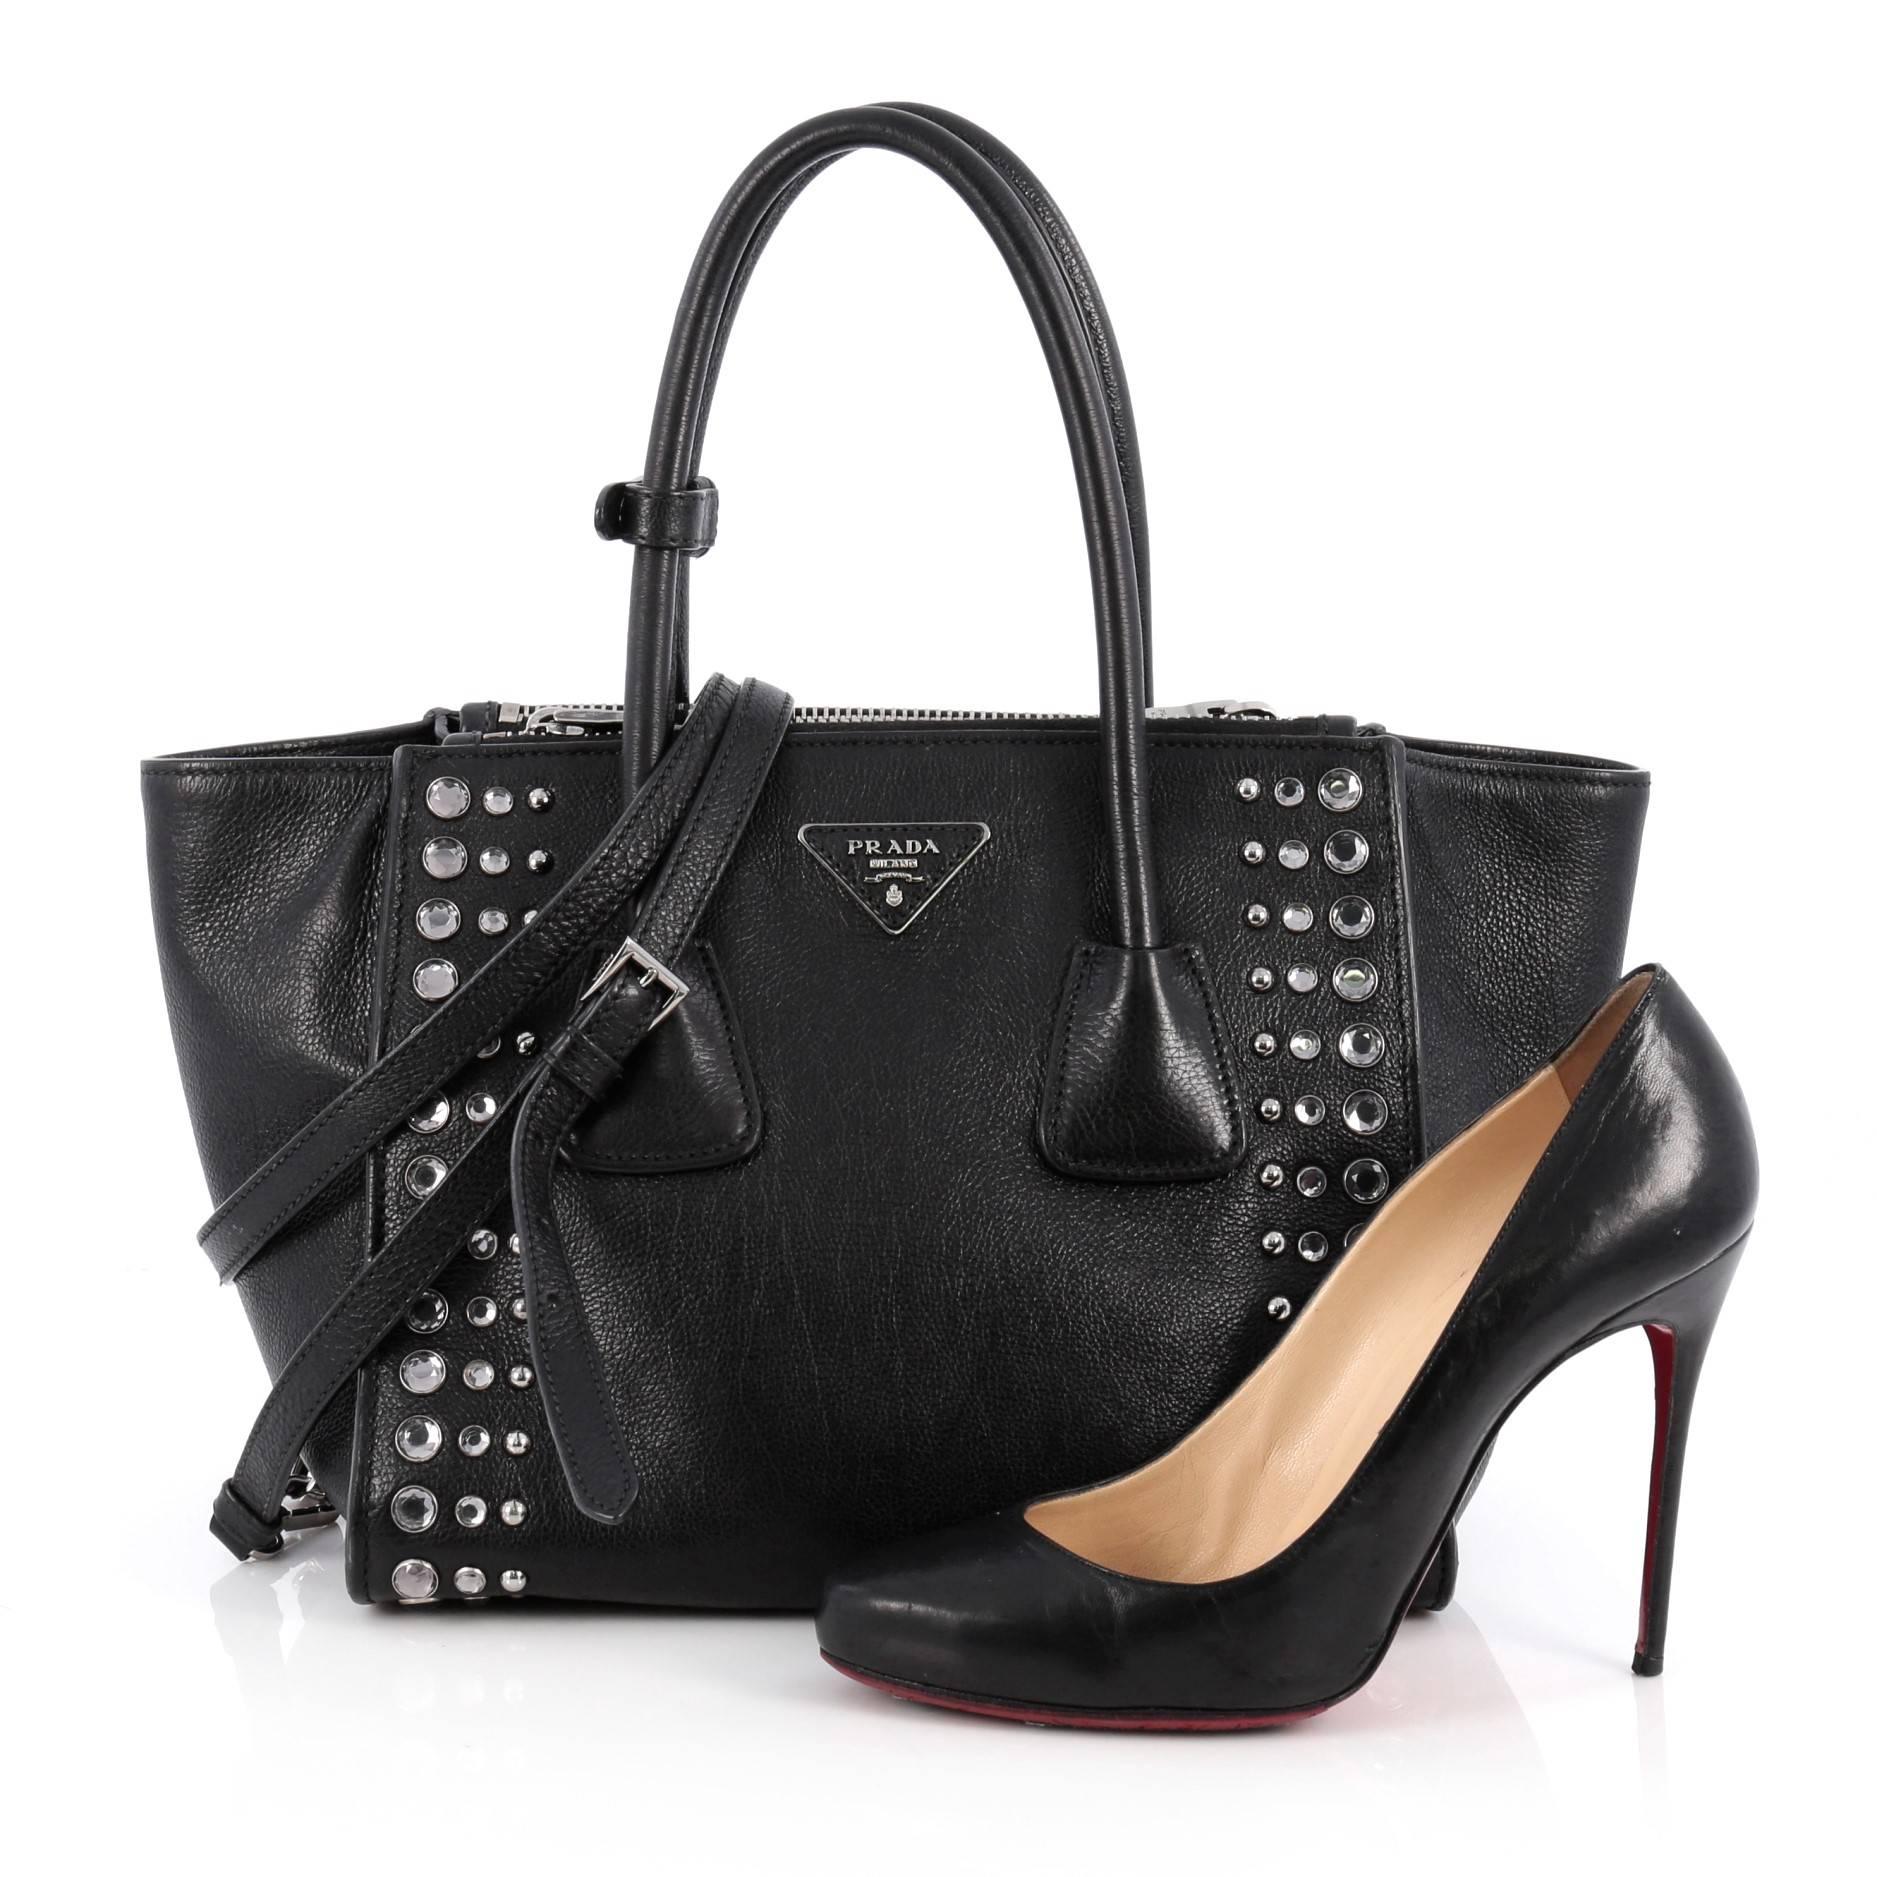 This authentic Prada Twin Pocket Tote Studded Glace Calf Small showcases a sophisticated silhouette balancing modern luxury and style. Crafted from black glace calf leather, this boxy tote features tall dual-rolled top handles, extended sides,